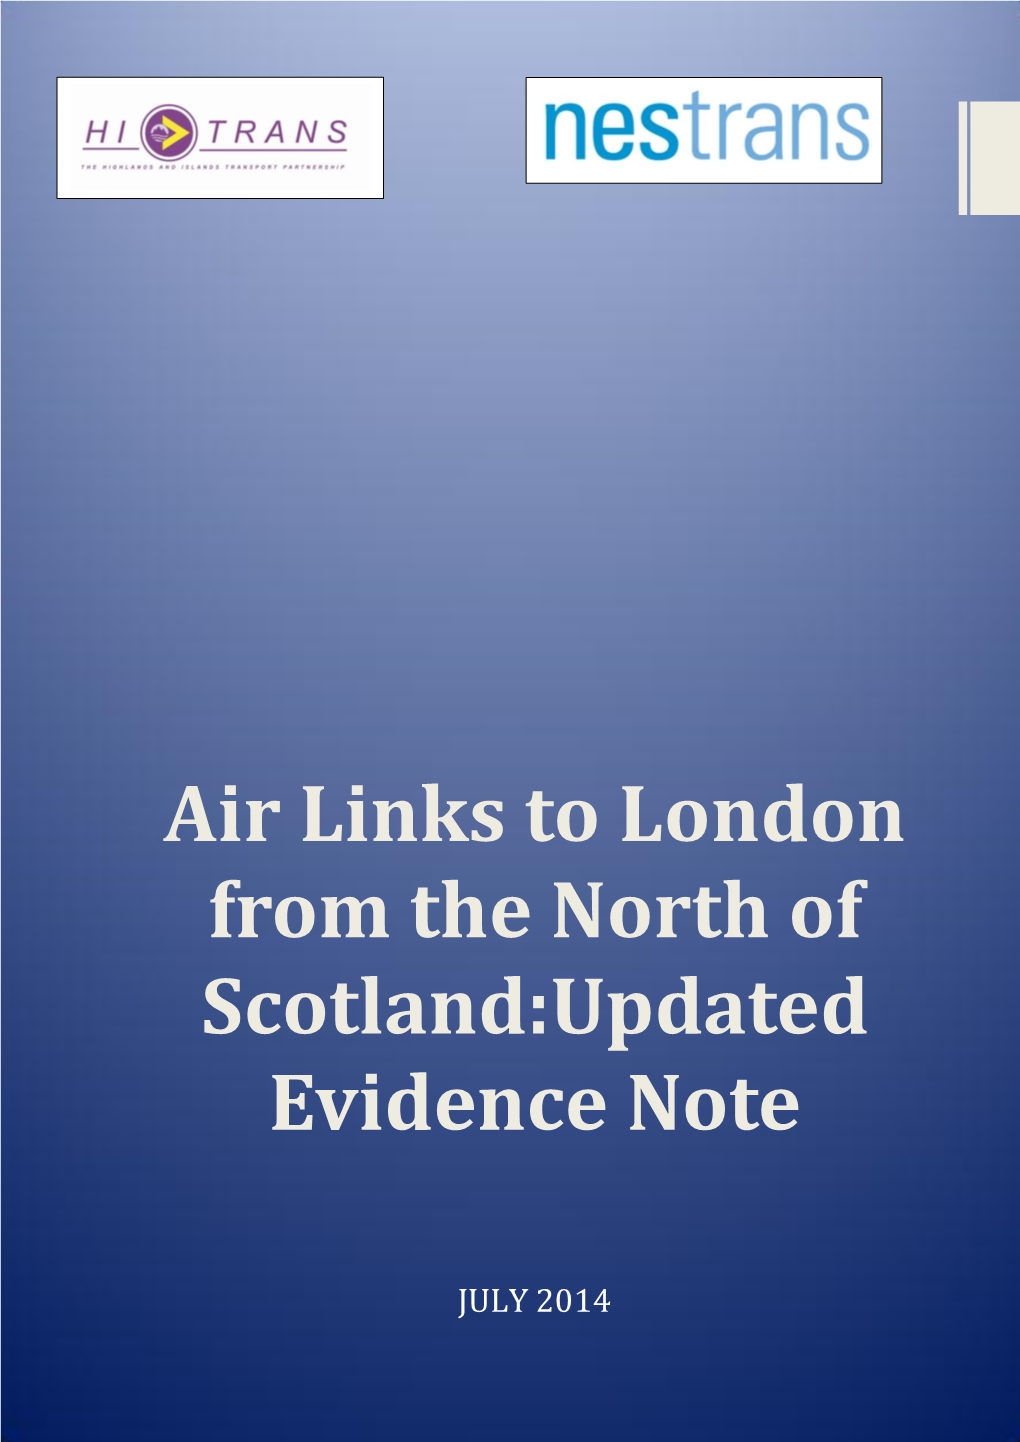 Air Links to London from the North of Scotland:Updated Evidence Note